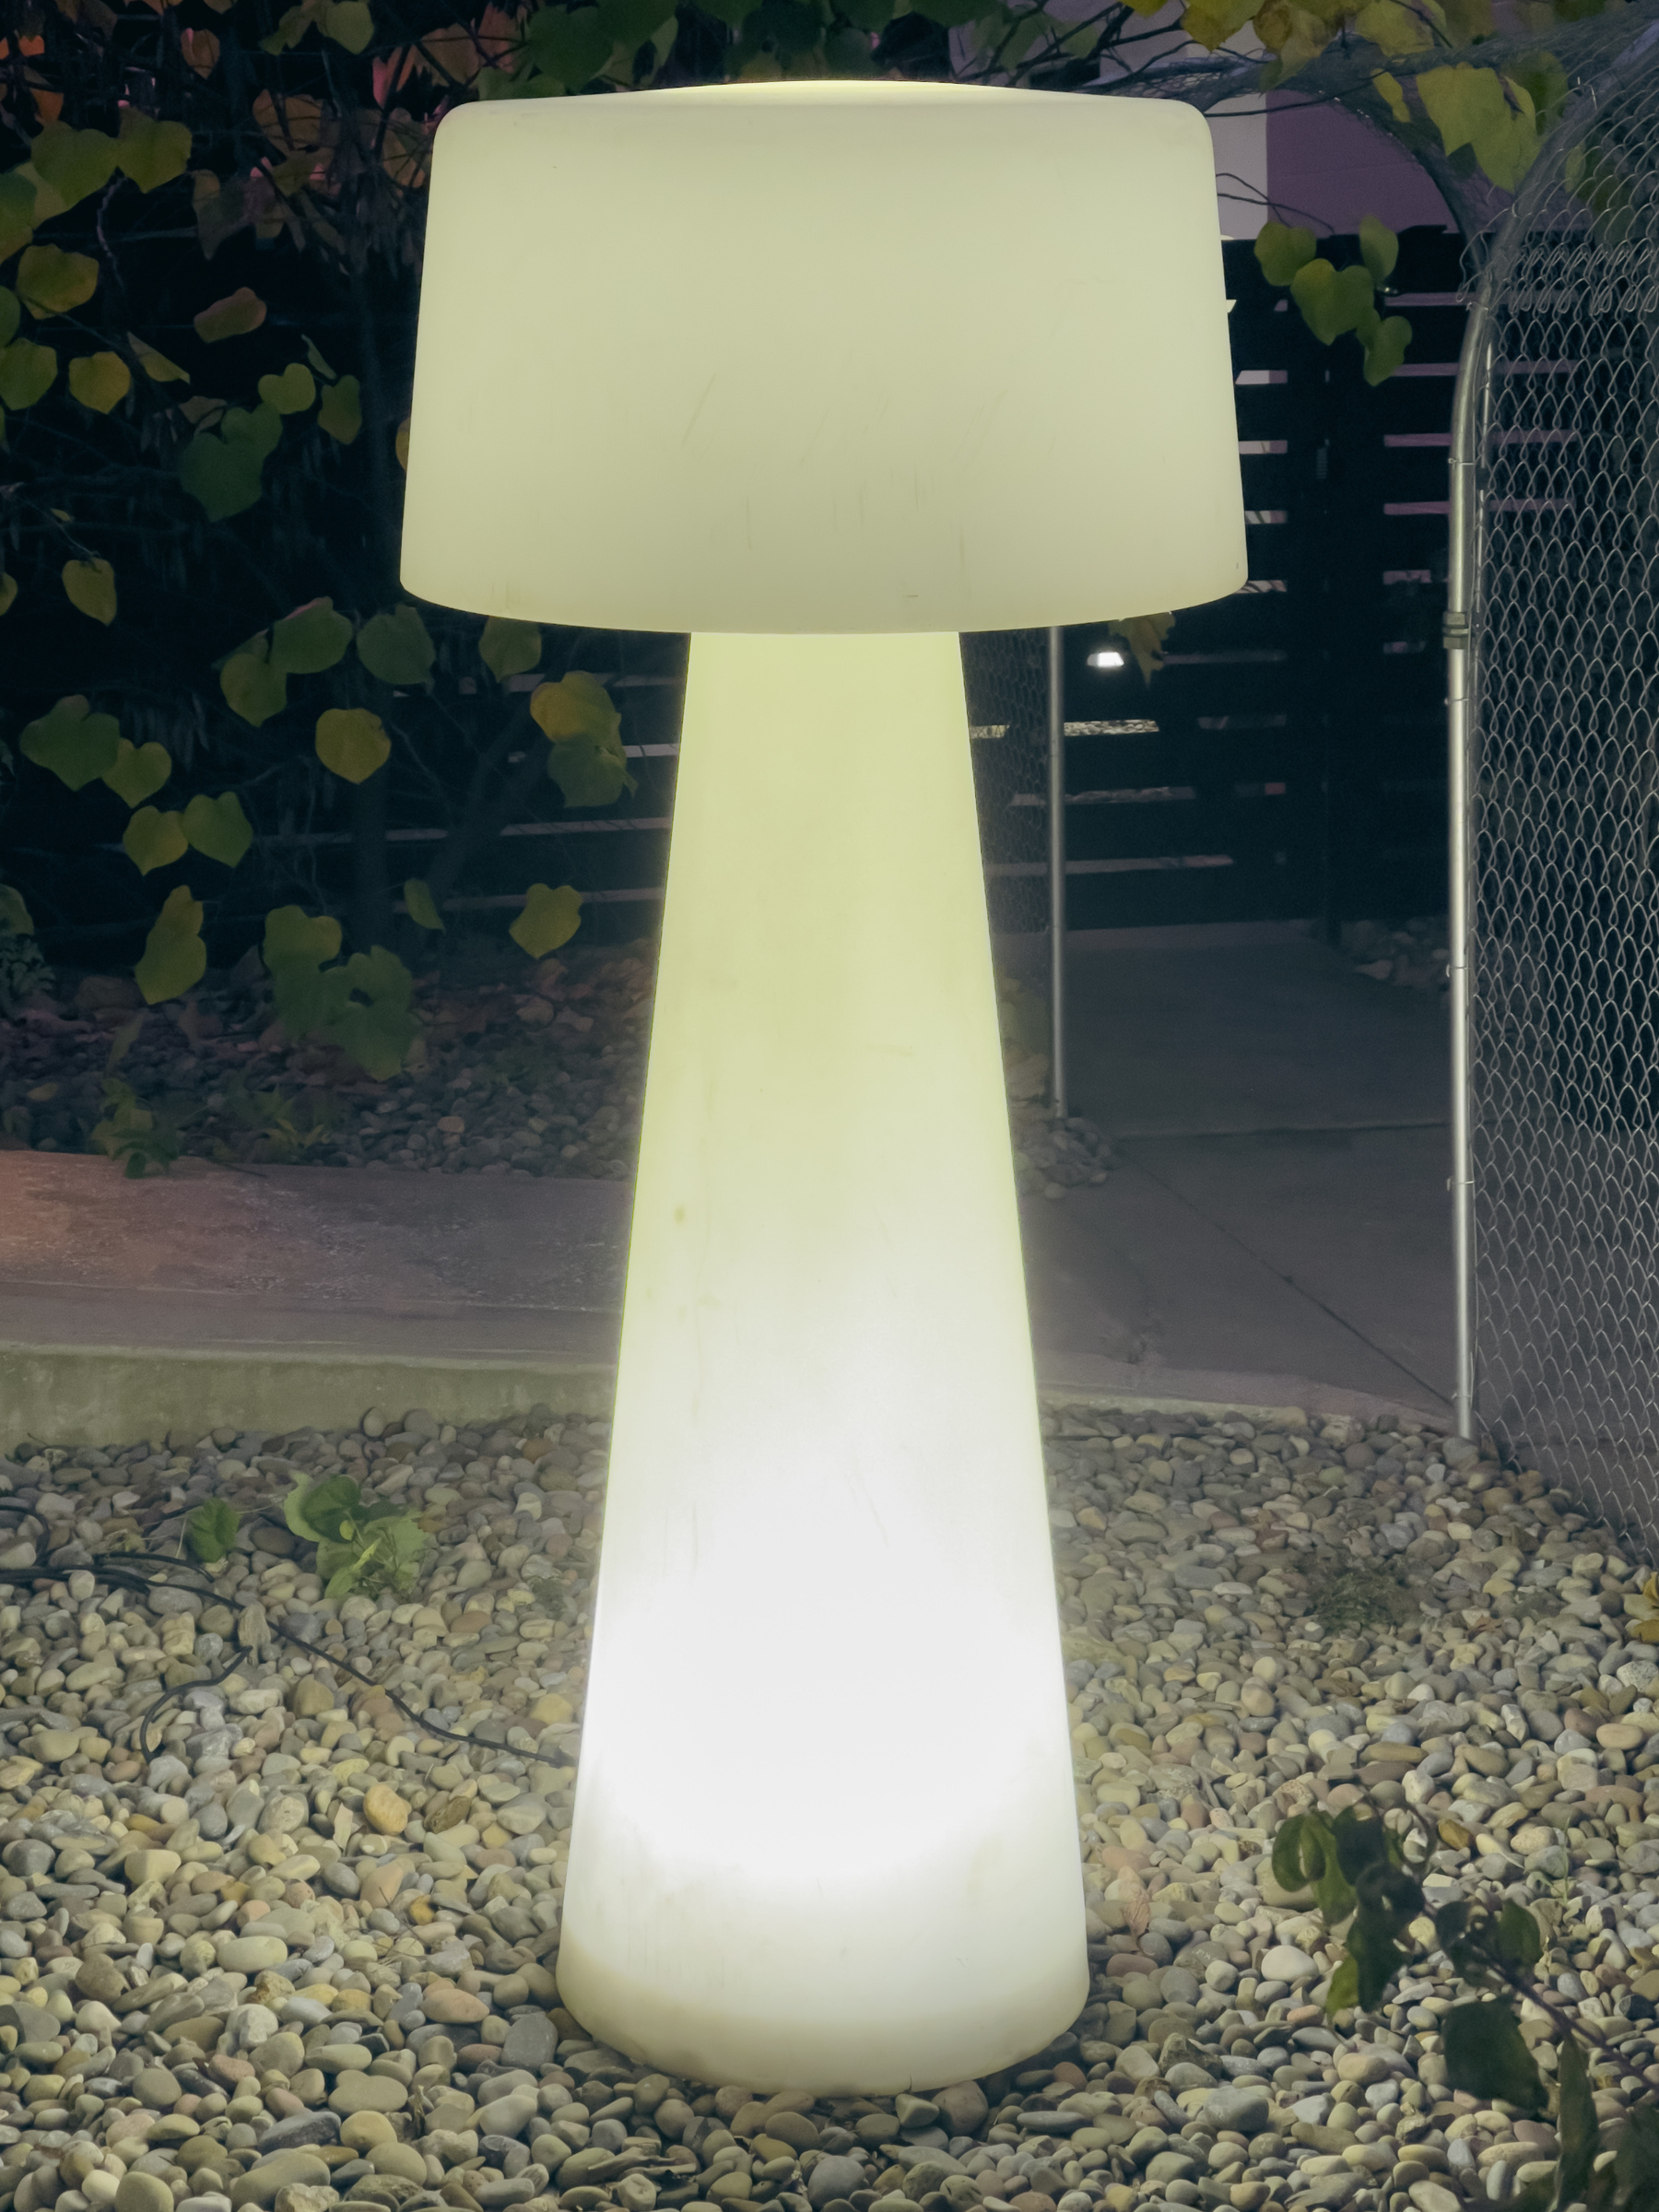 Large outdoor light fixture in shape of modern lamp and glowing in early morning.